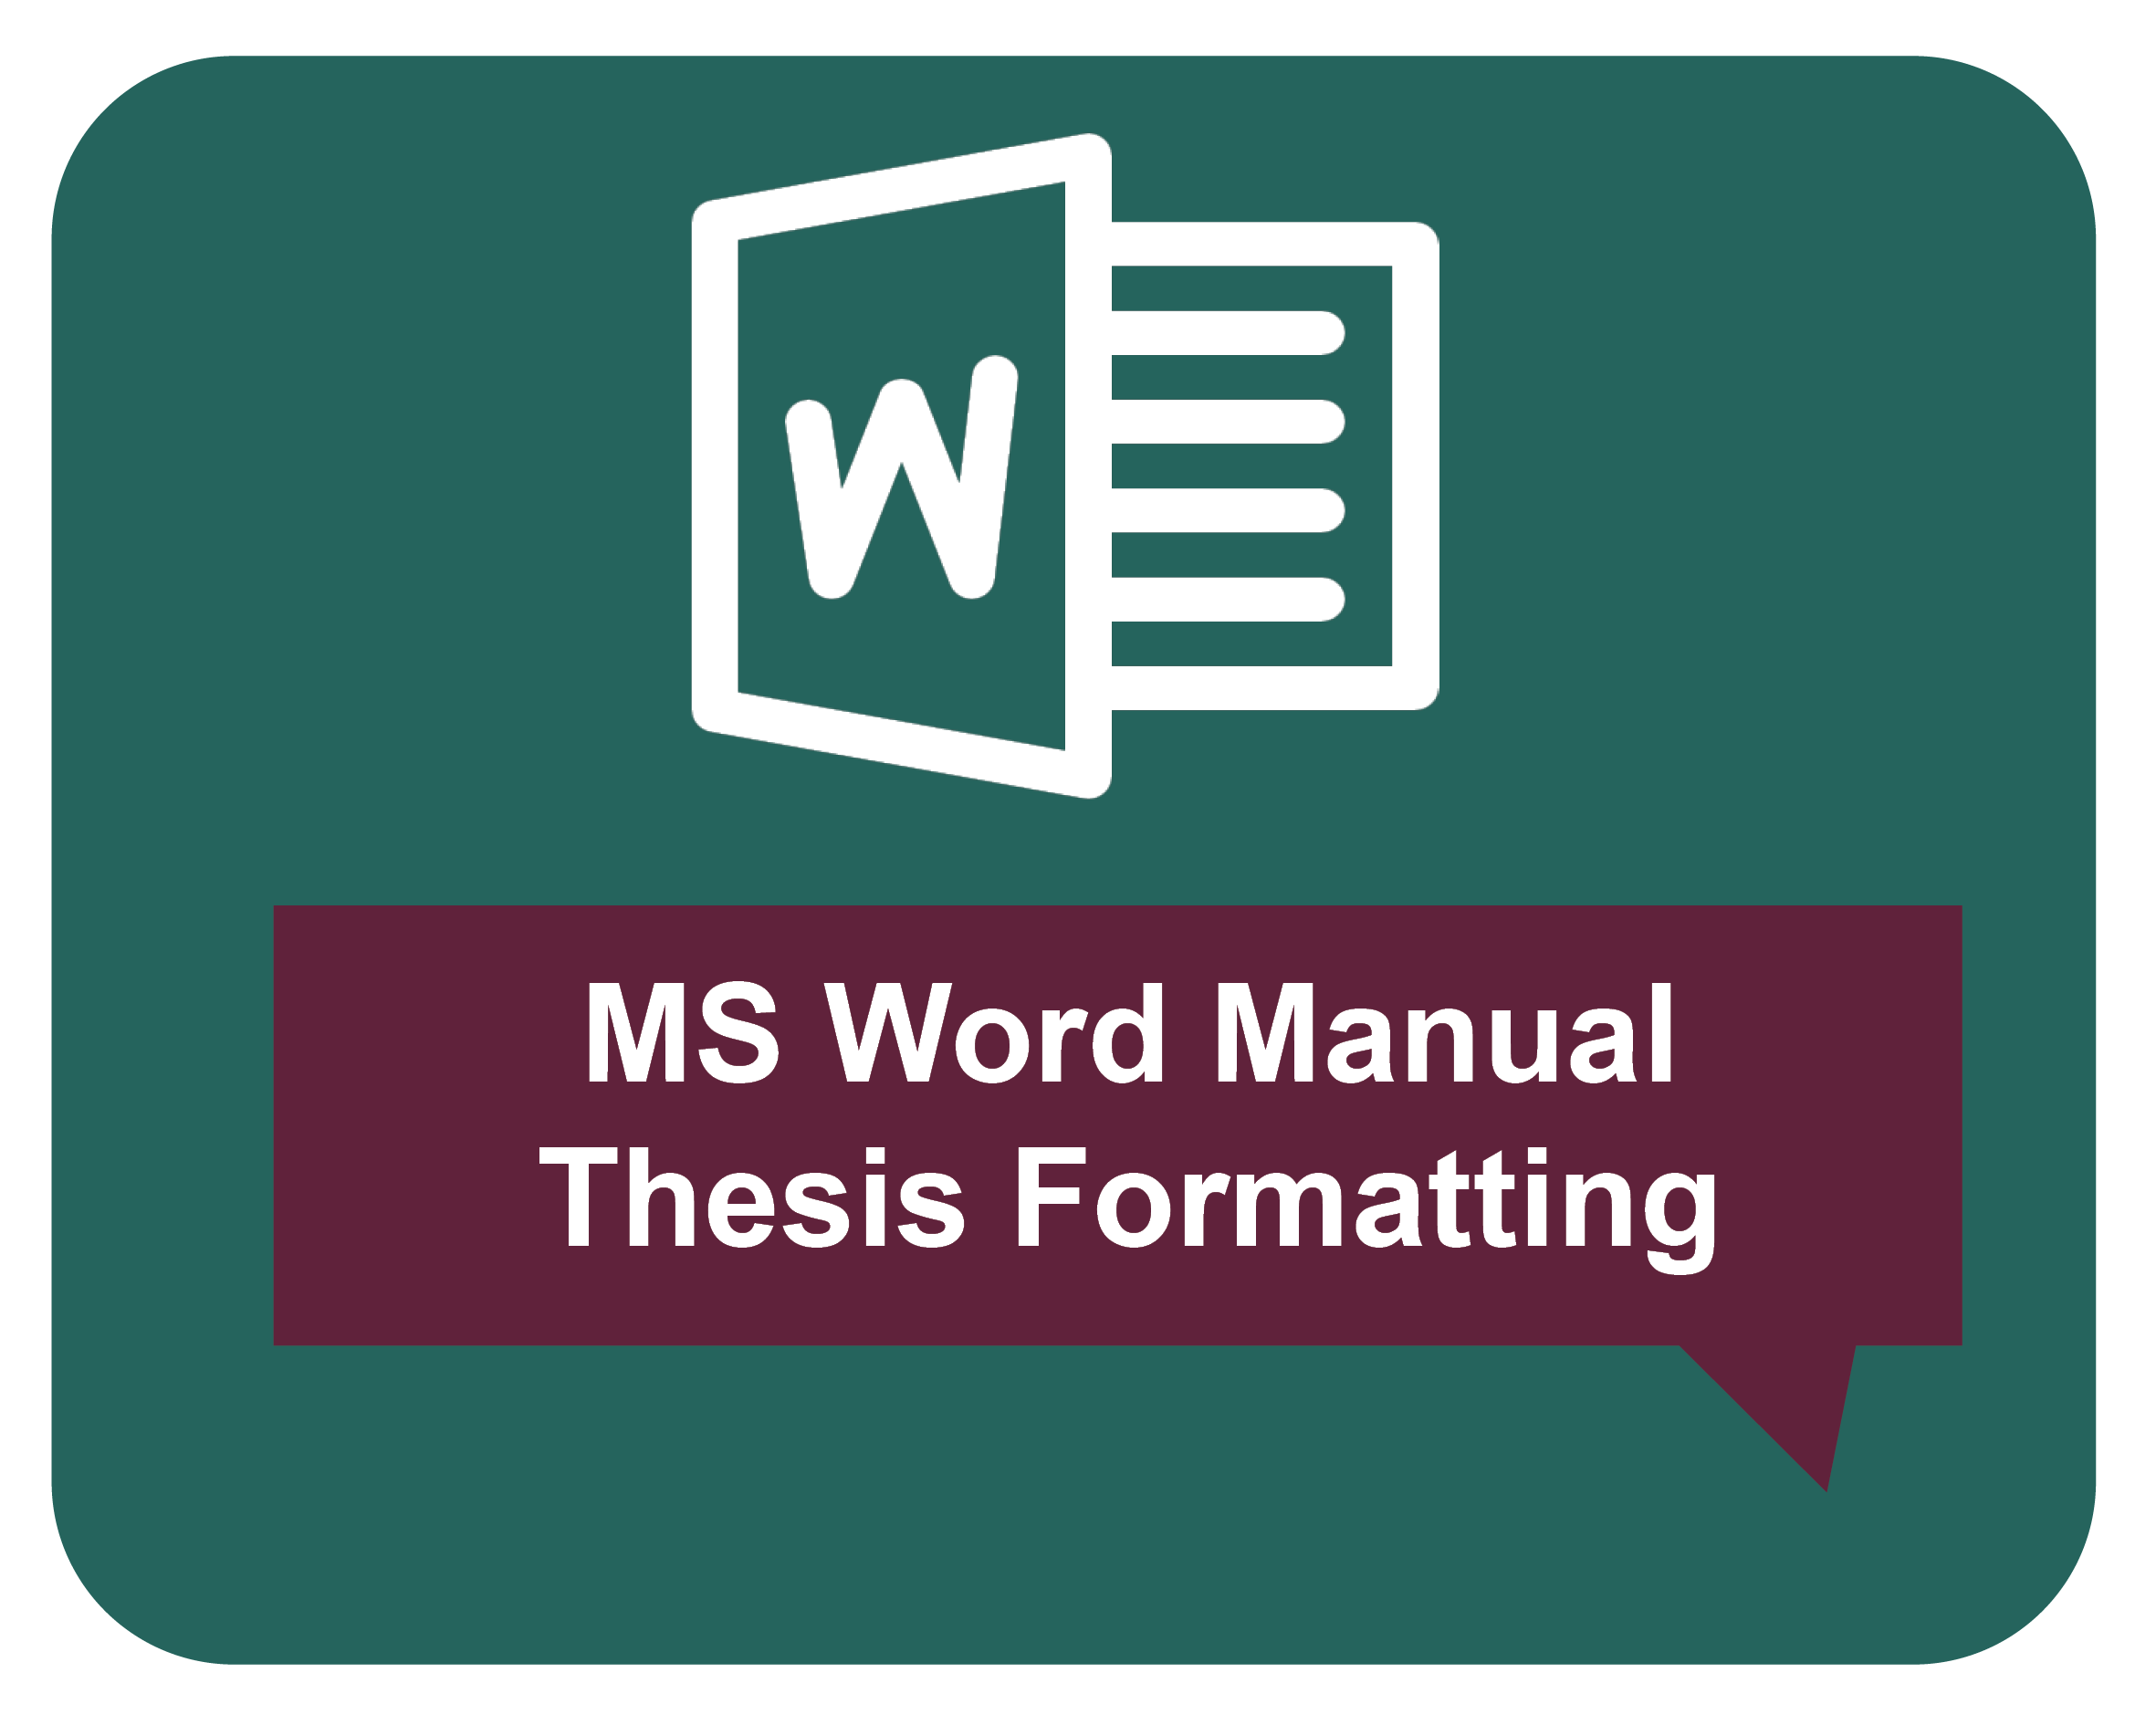 MS word manual thesis formatting icon.png